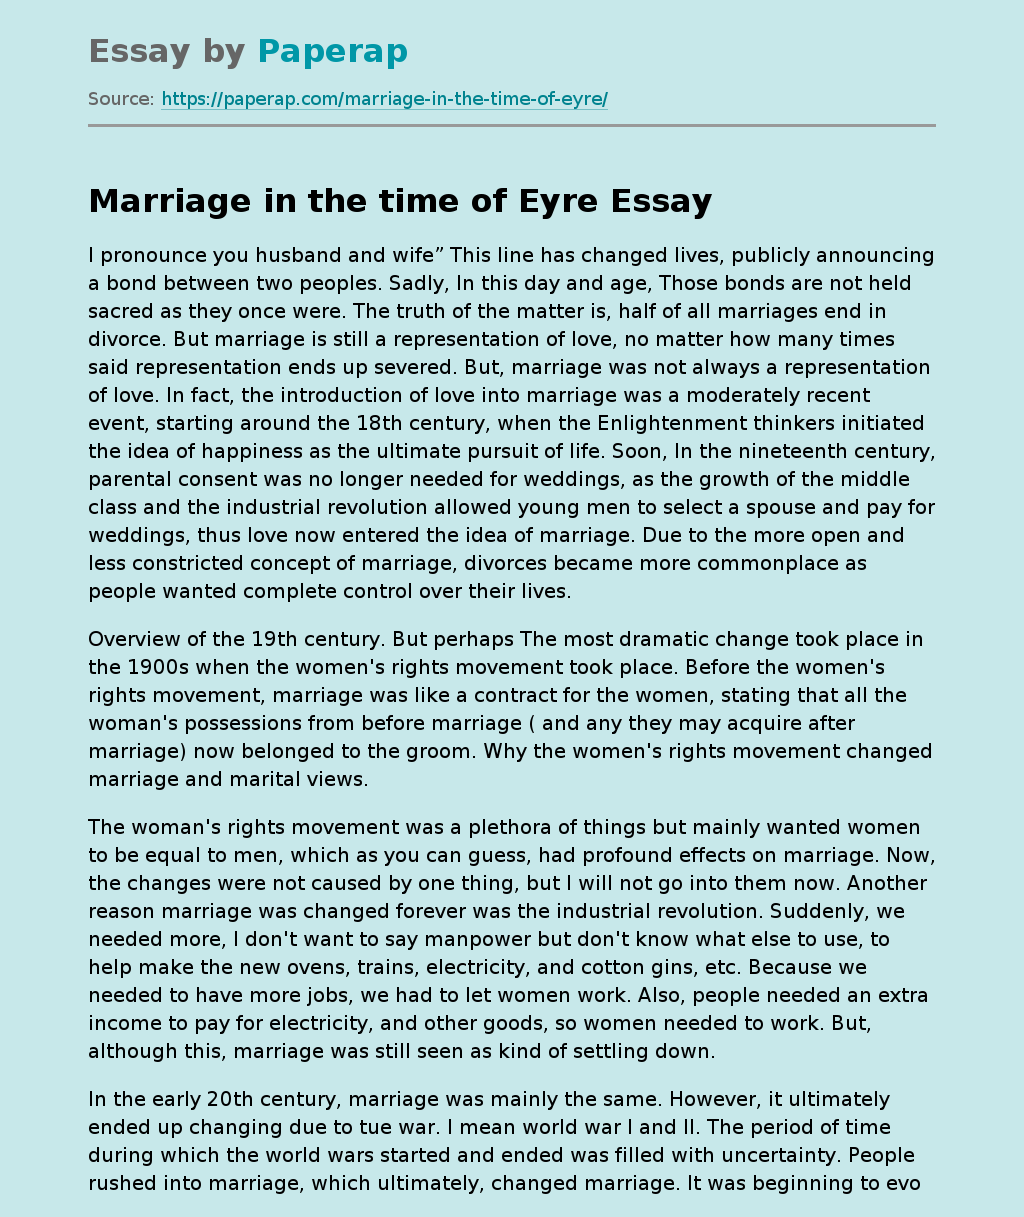 Marriage in the time of Eyre